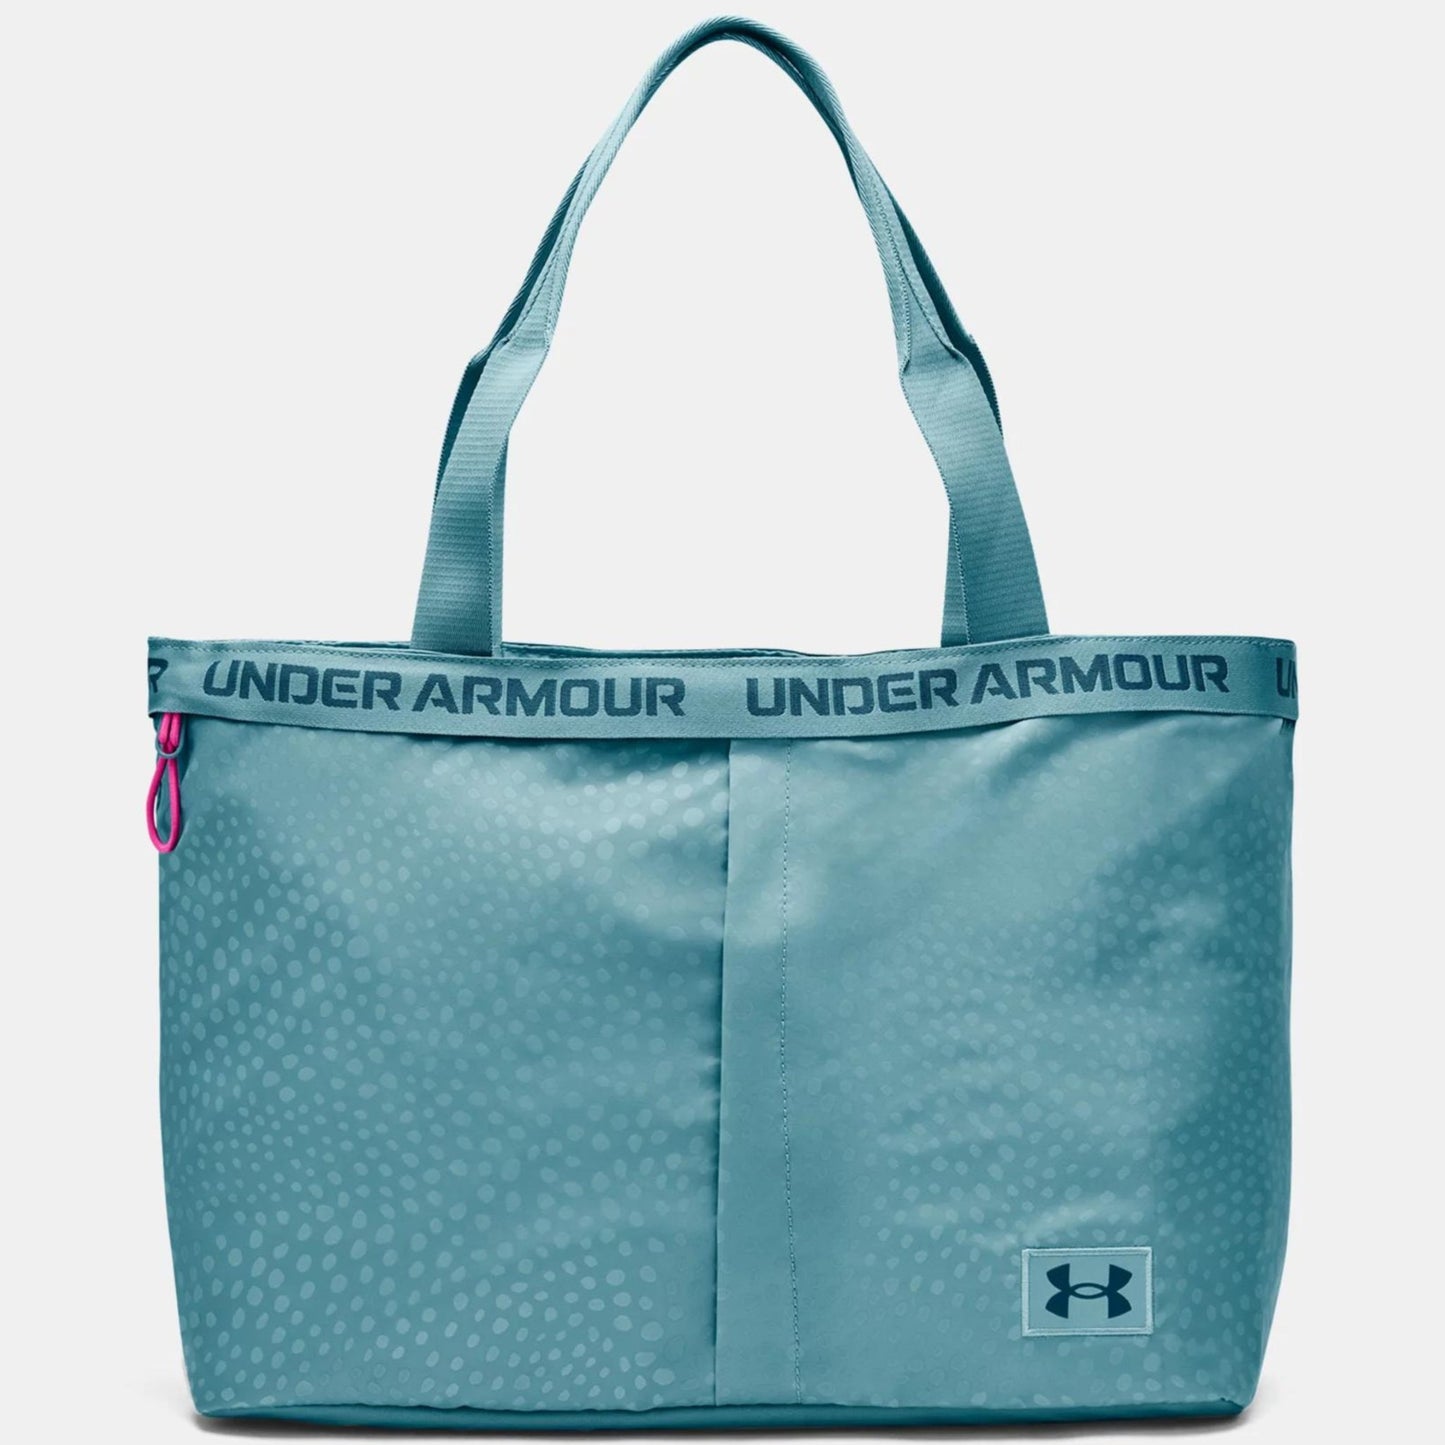 Under Armour-Under Armour Women's Essentials Tote Tote Bag (Static Blue) - Brandat Outlet